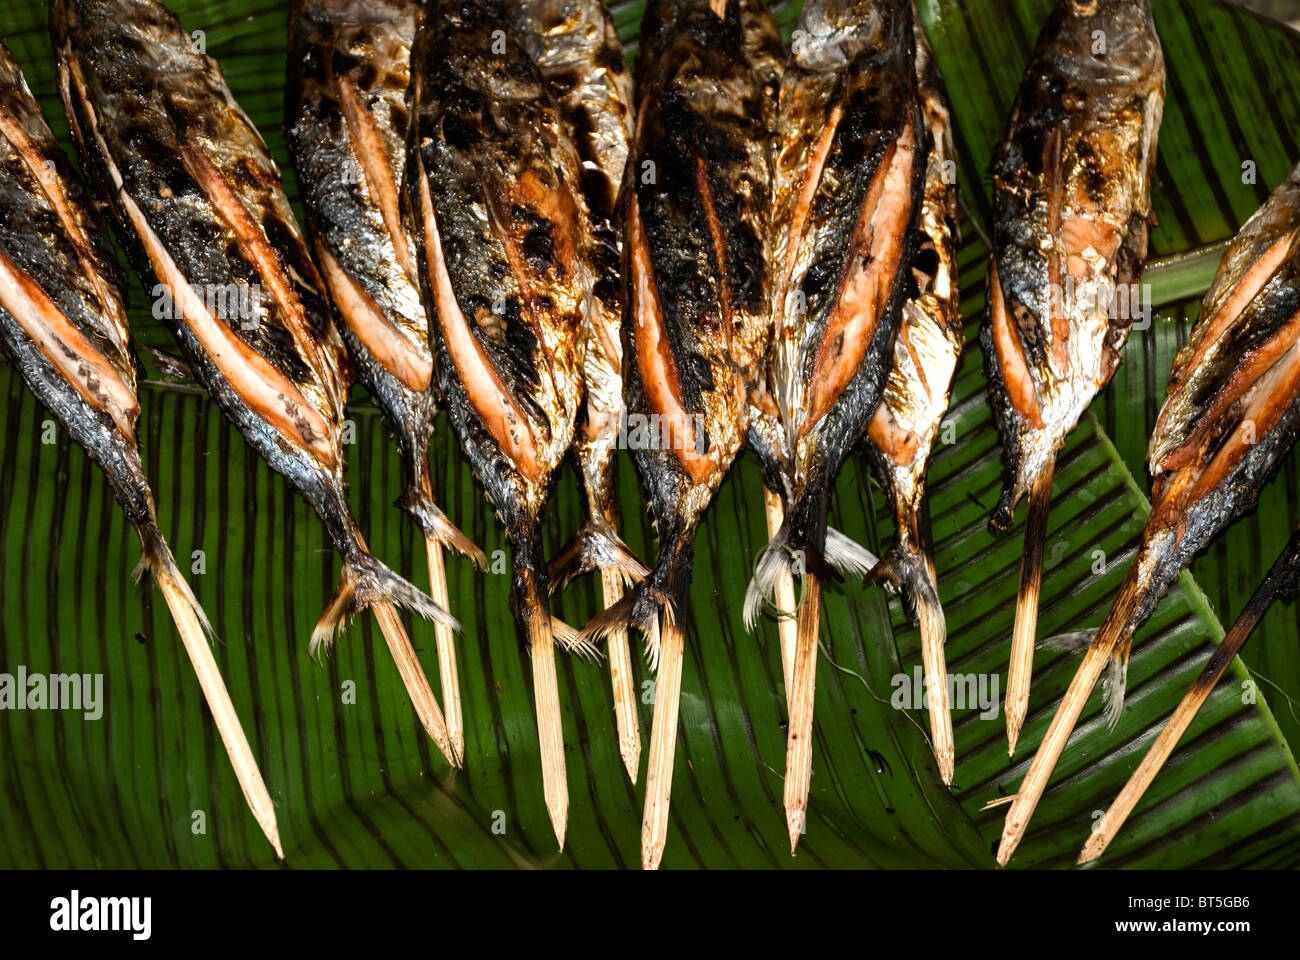 philippines, siquijor island, siquijor town, barbecued fish Stock Photo